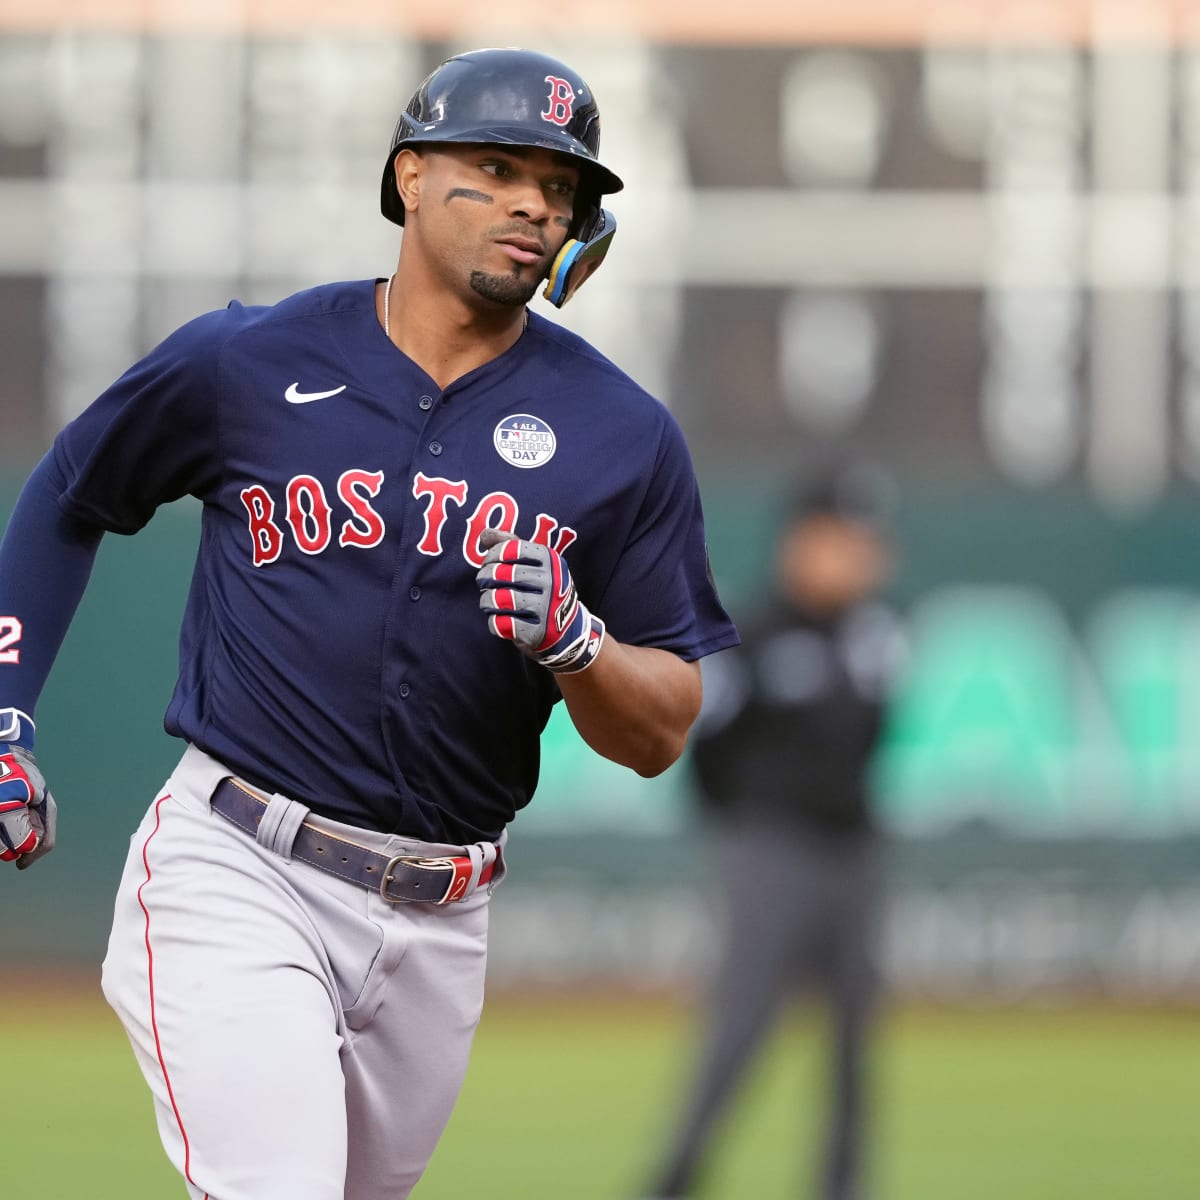 Red Sox shortstop options for 2023